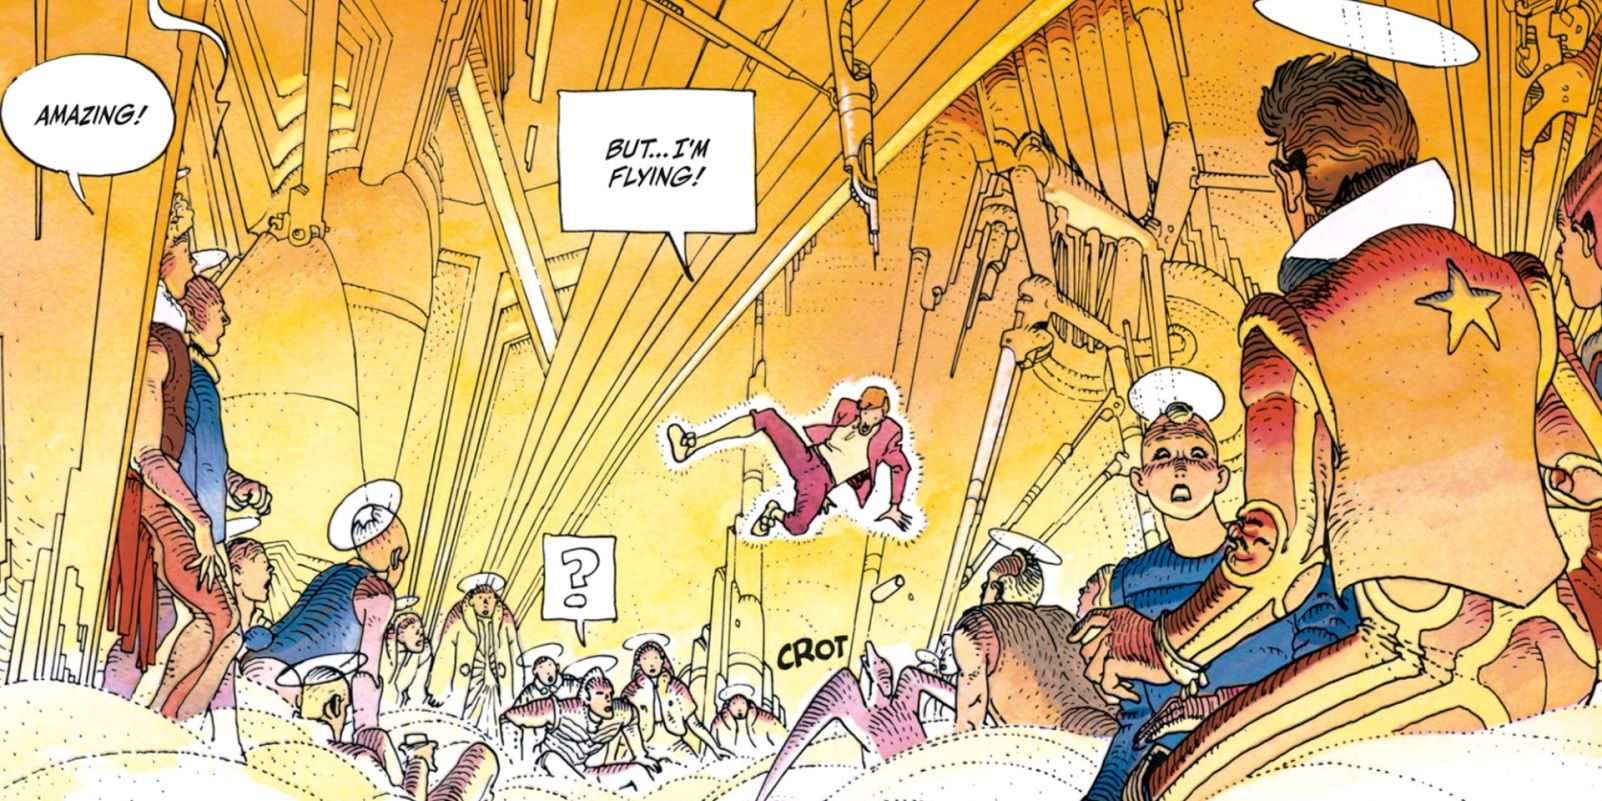 A scene from the comic book The Incal